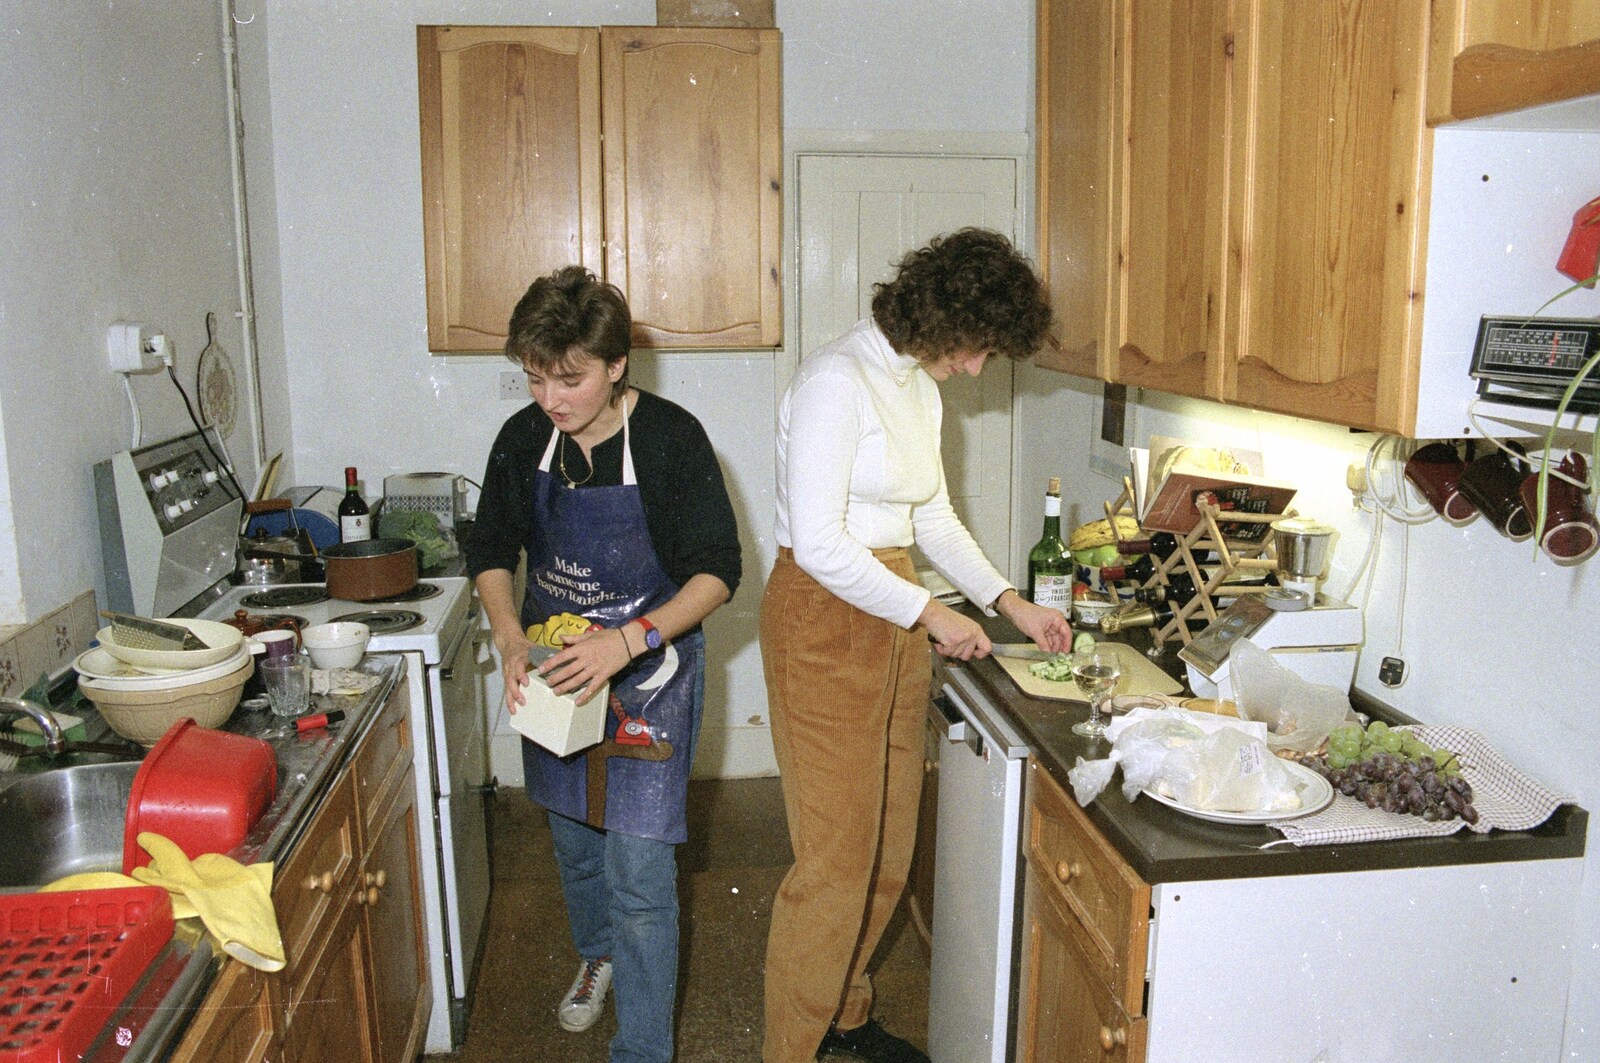 Some dinner preparation from A Trip to Kenilworth, Warwickshire - 21st September 1989